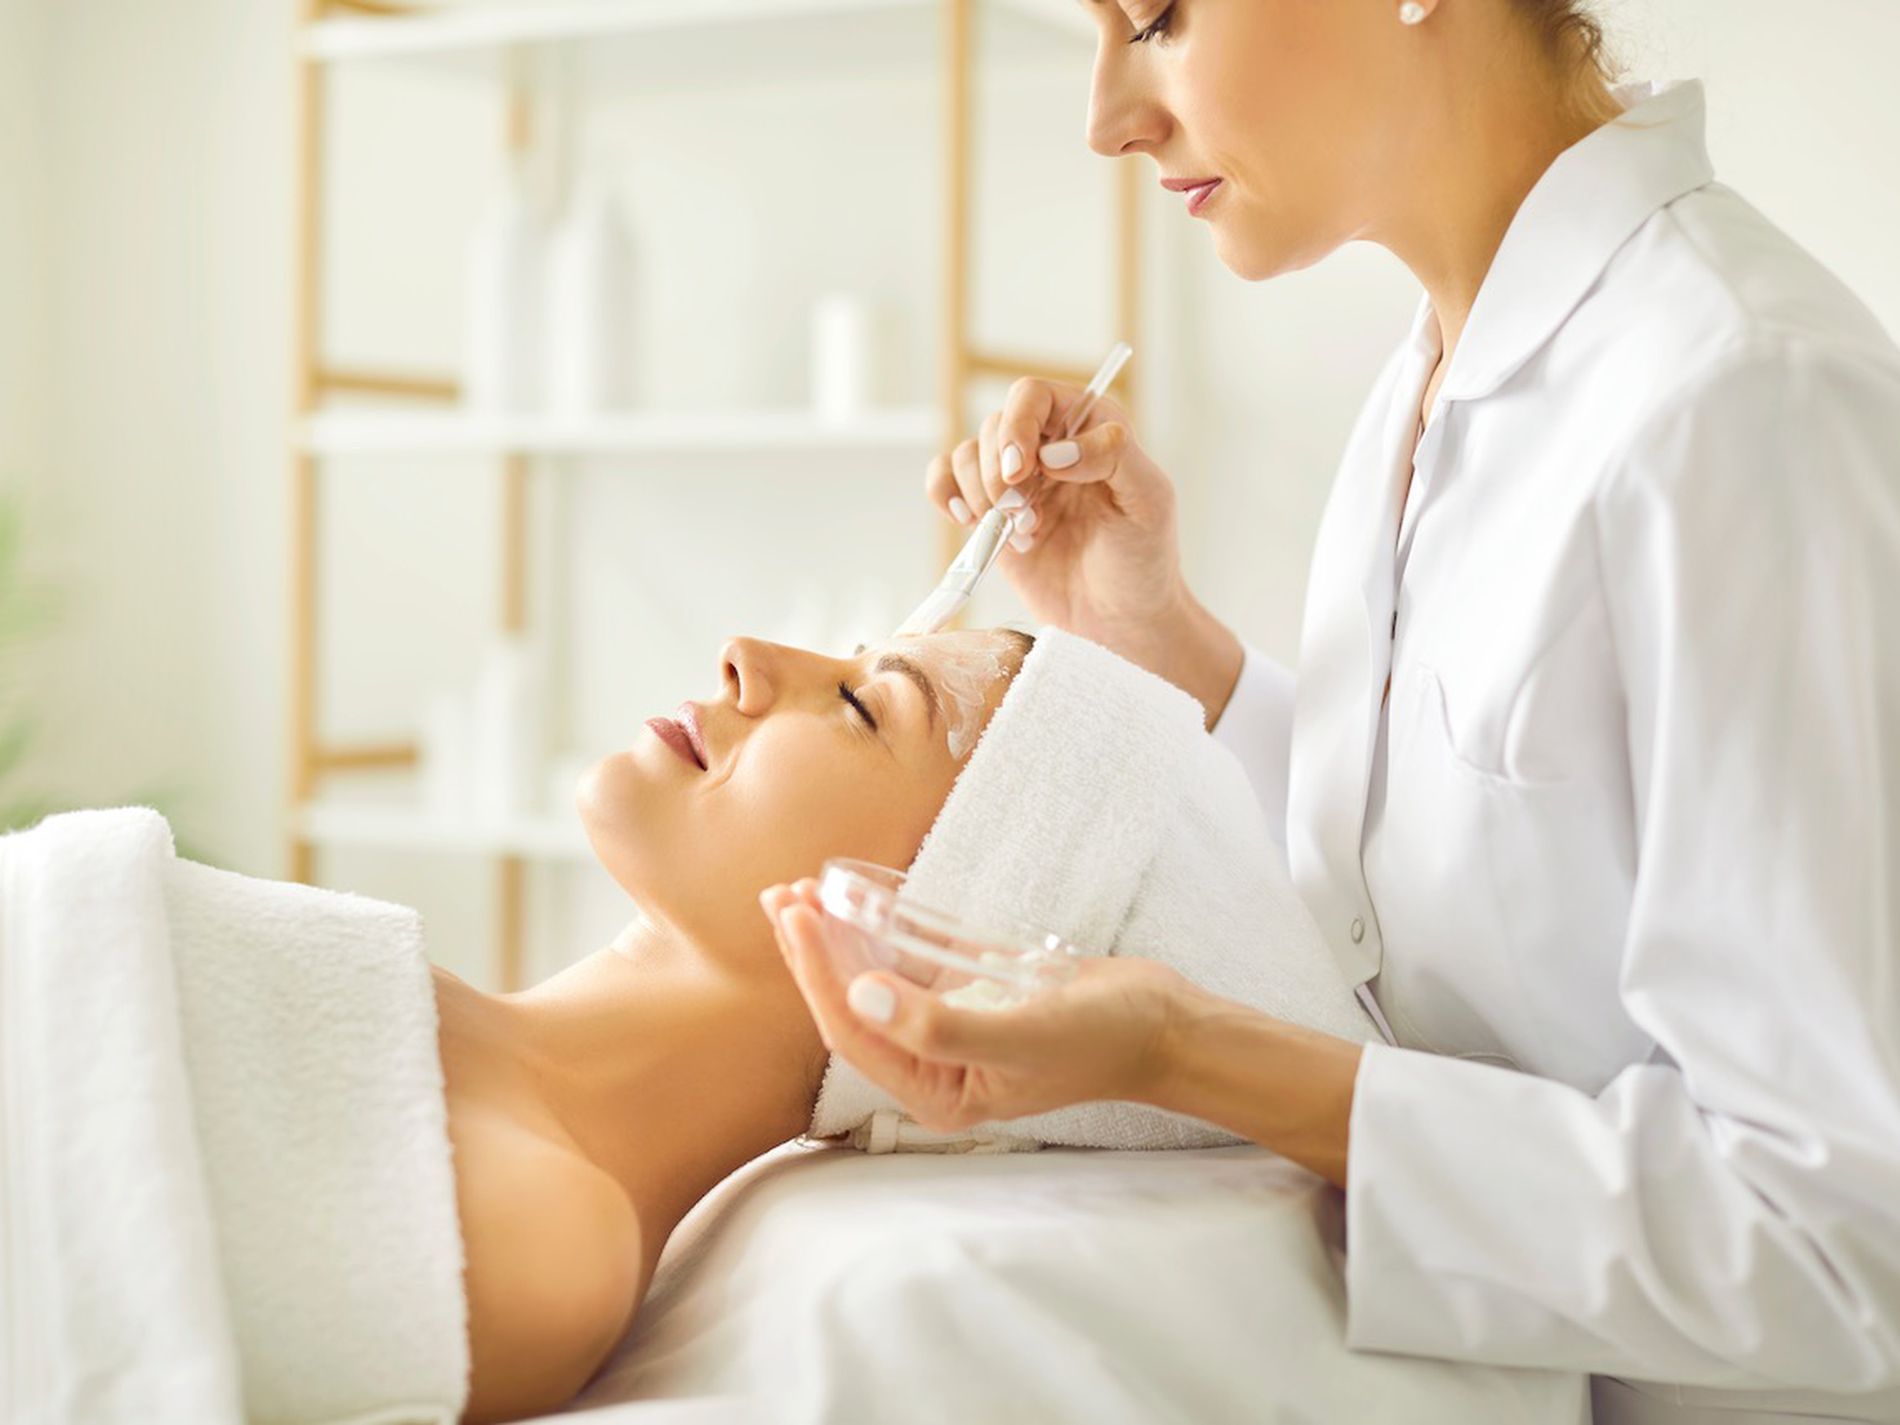 Skin Clinic Business for sale